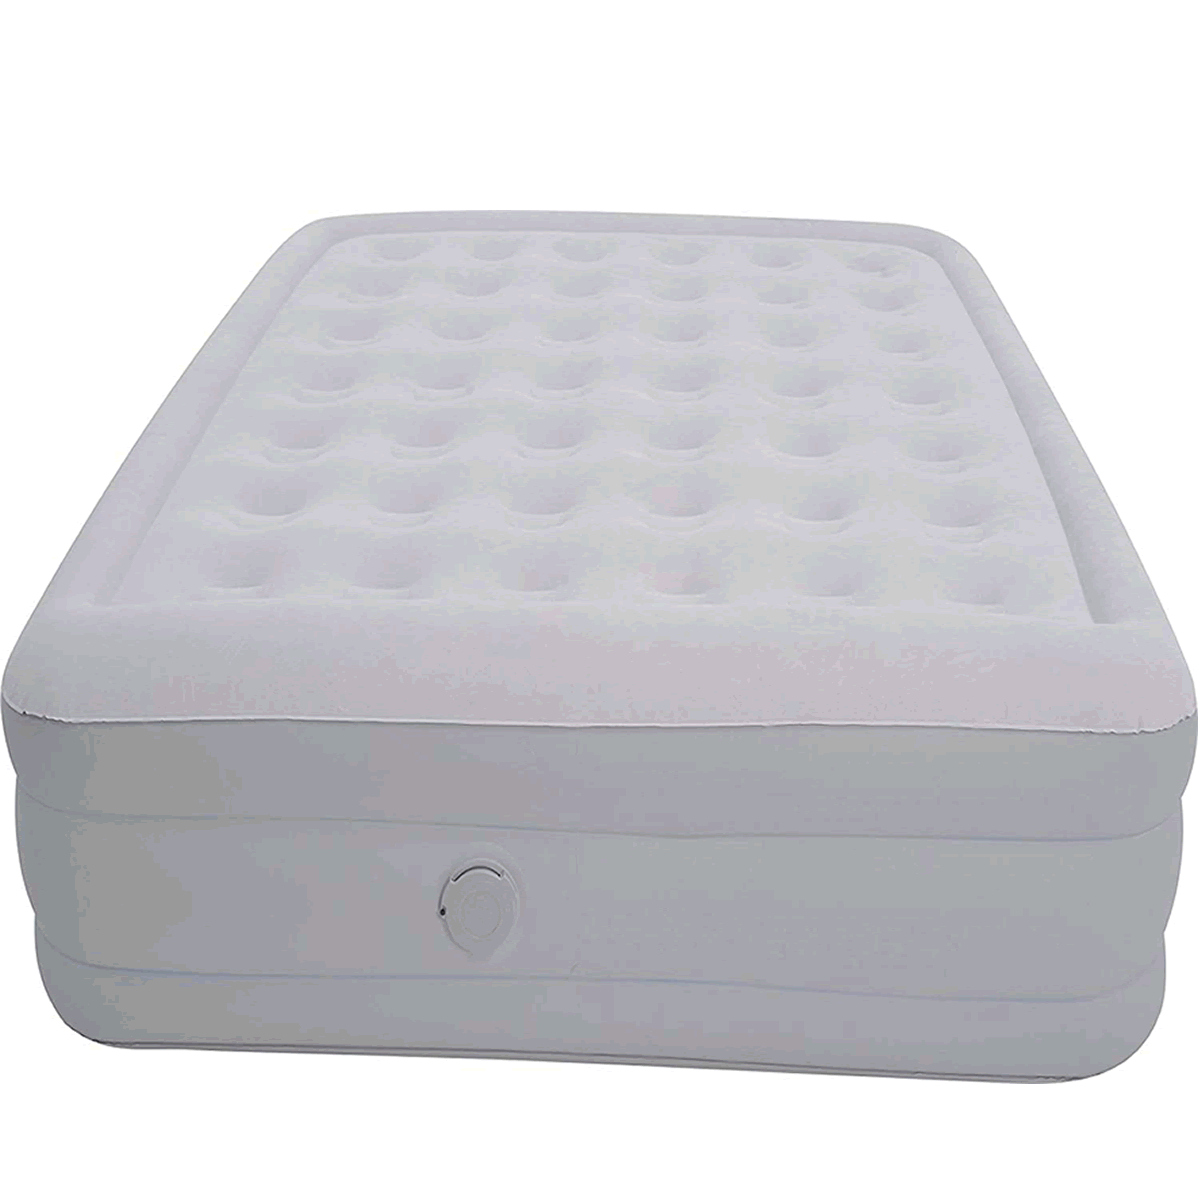 King Size Air Bed Blow Up Inflatable Mattress With Built ...